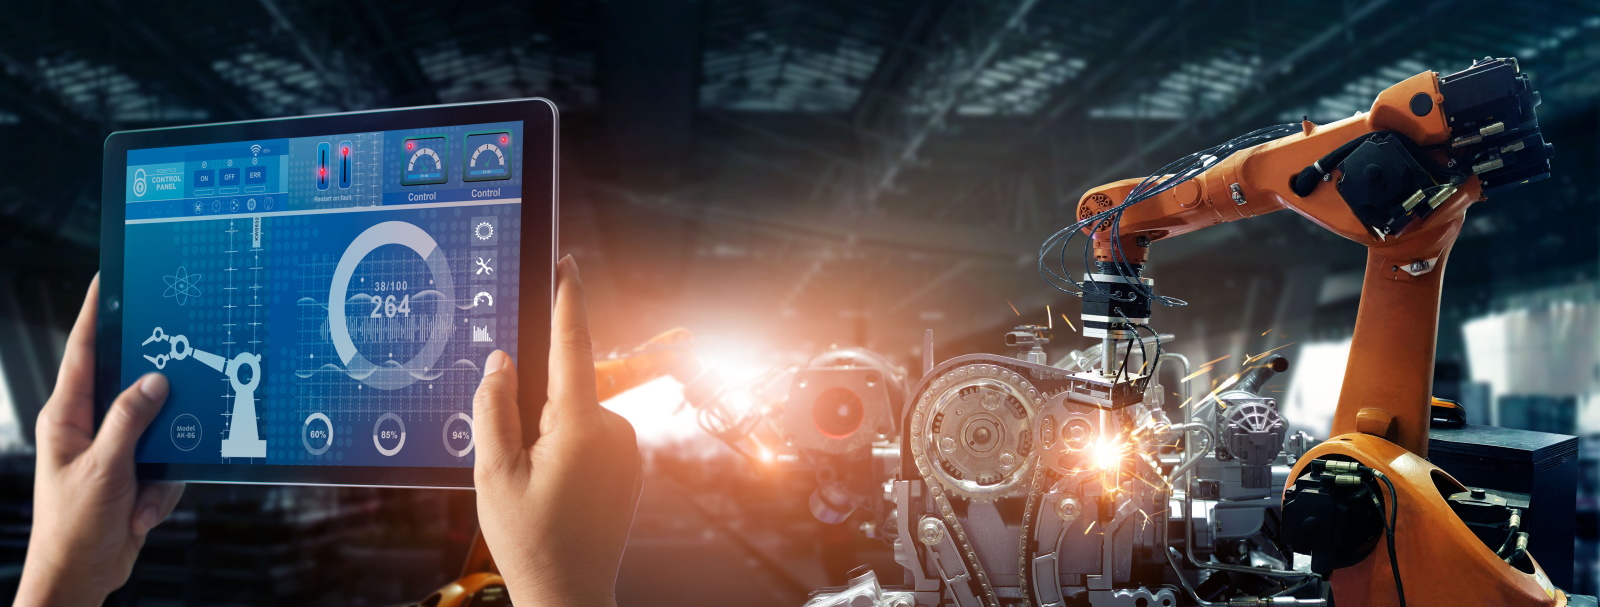 Broadcast: Is your manufacturing business platform ready for constantly changing demands?